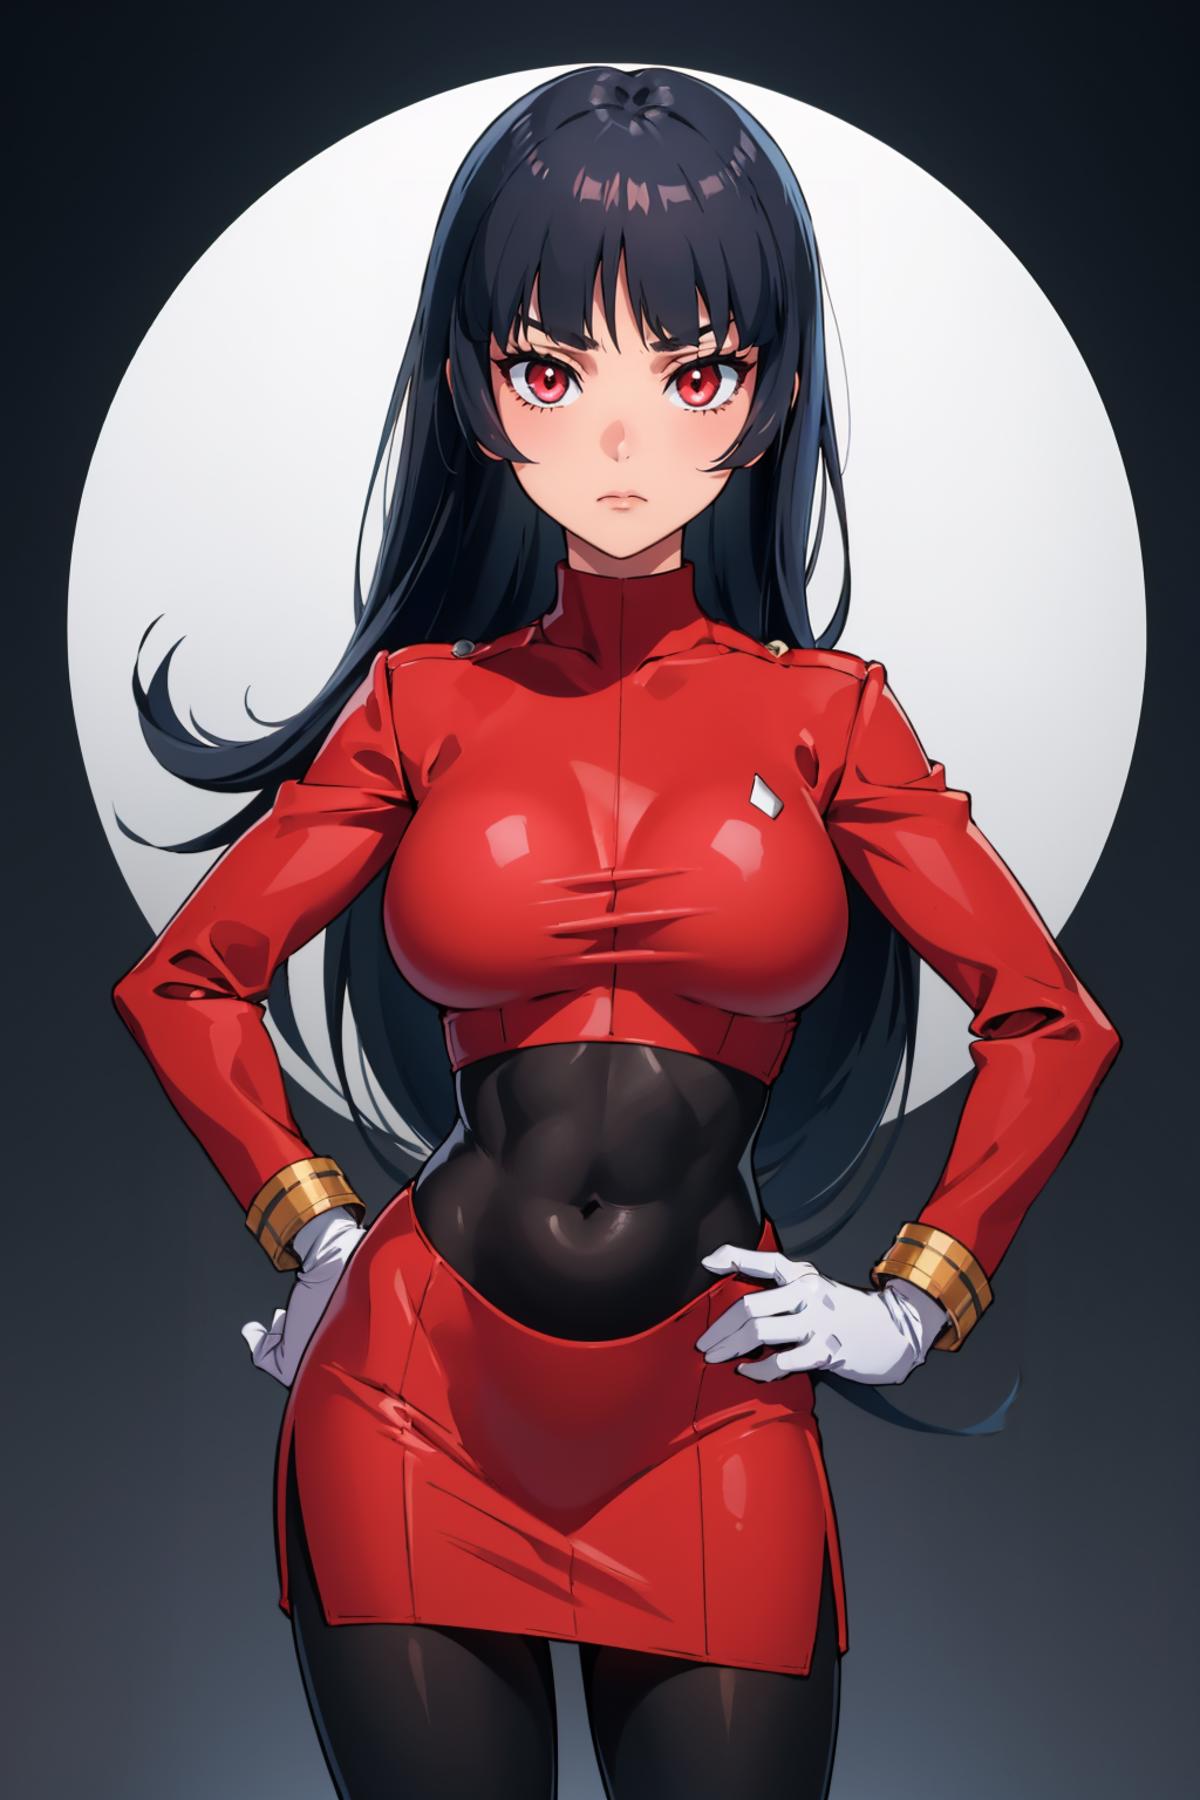 A red-haired anime girl wearing a red jumpsuit poses in a red circle.